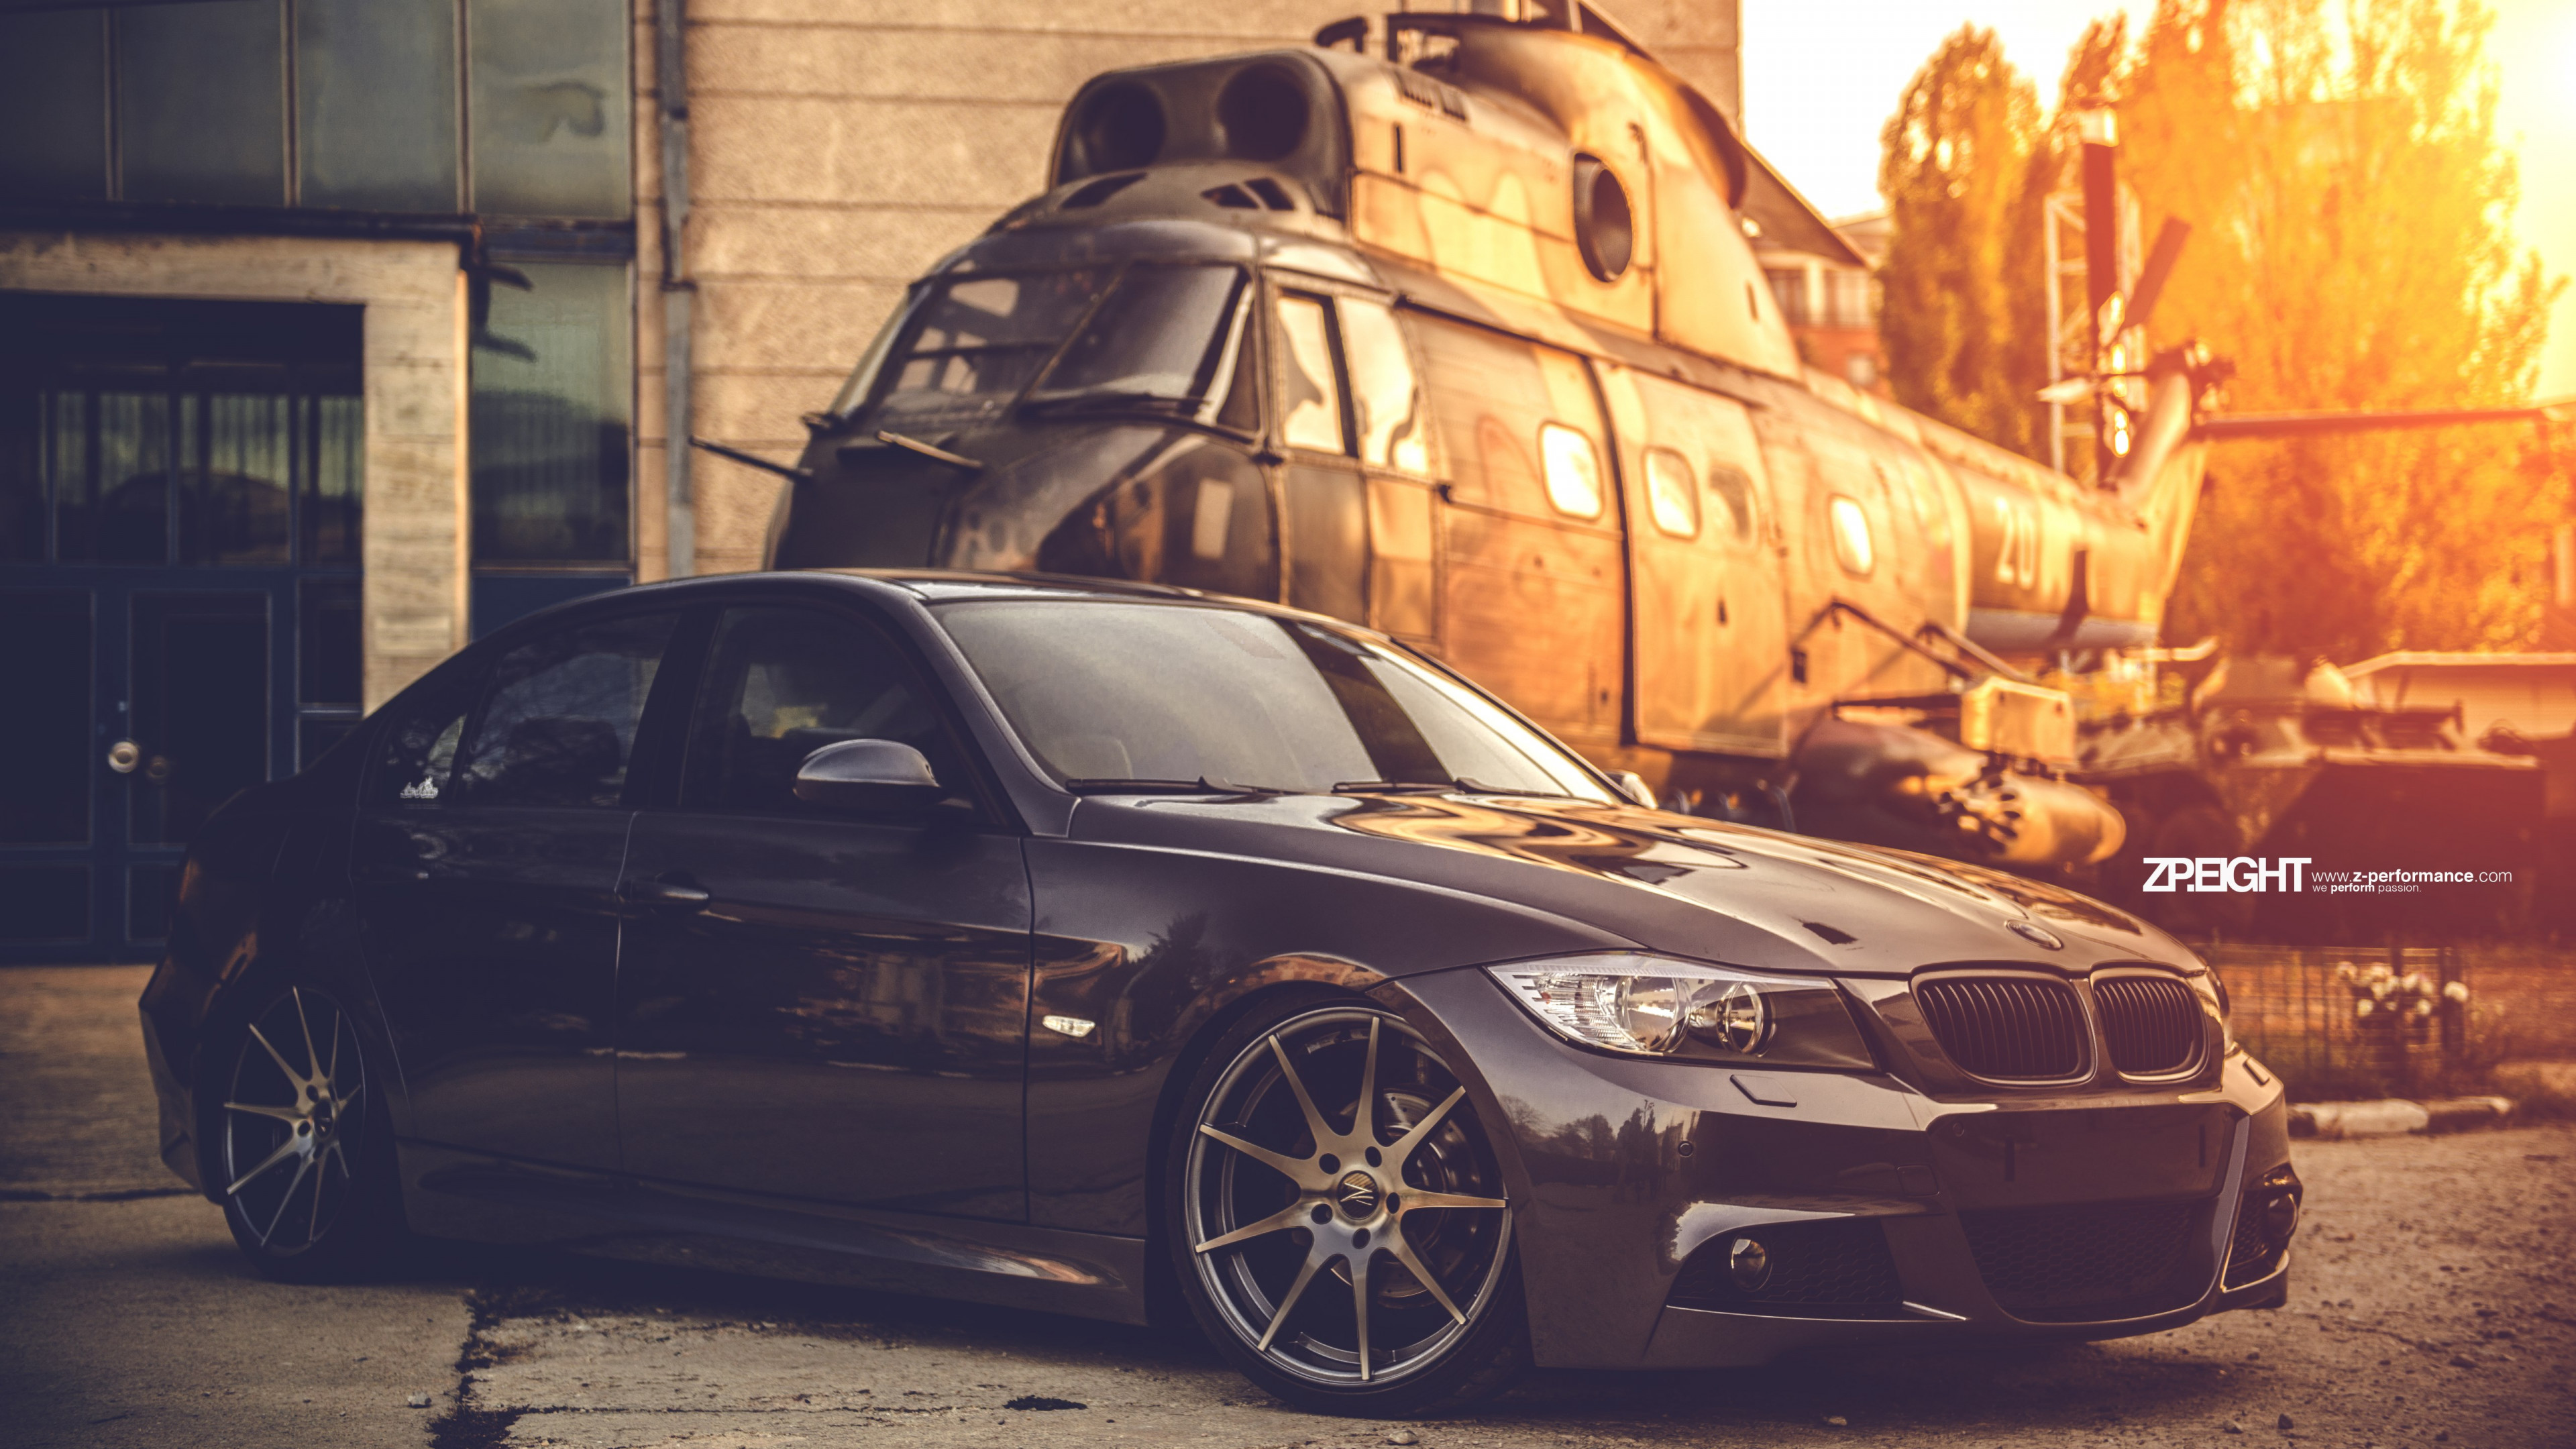 BMW E90 and one helicopter wallpaper 3840x2160